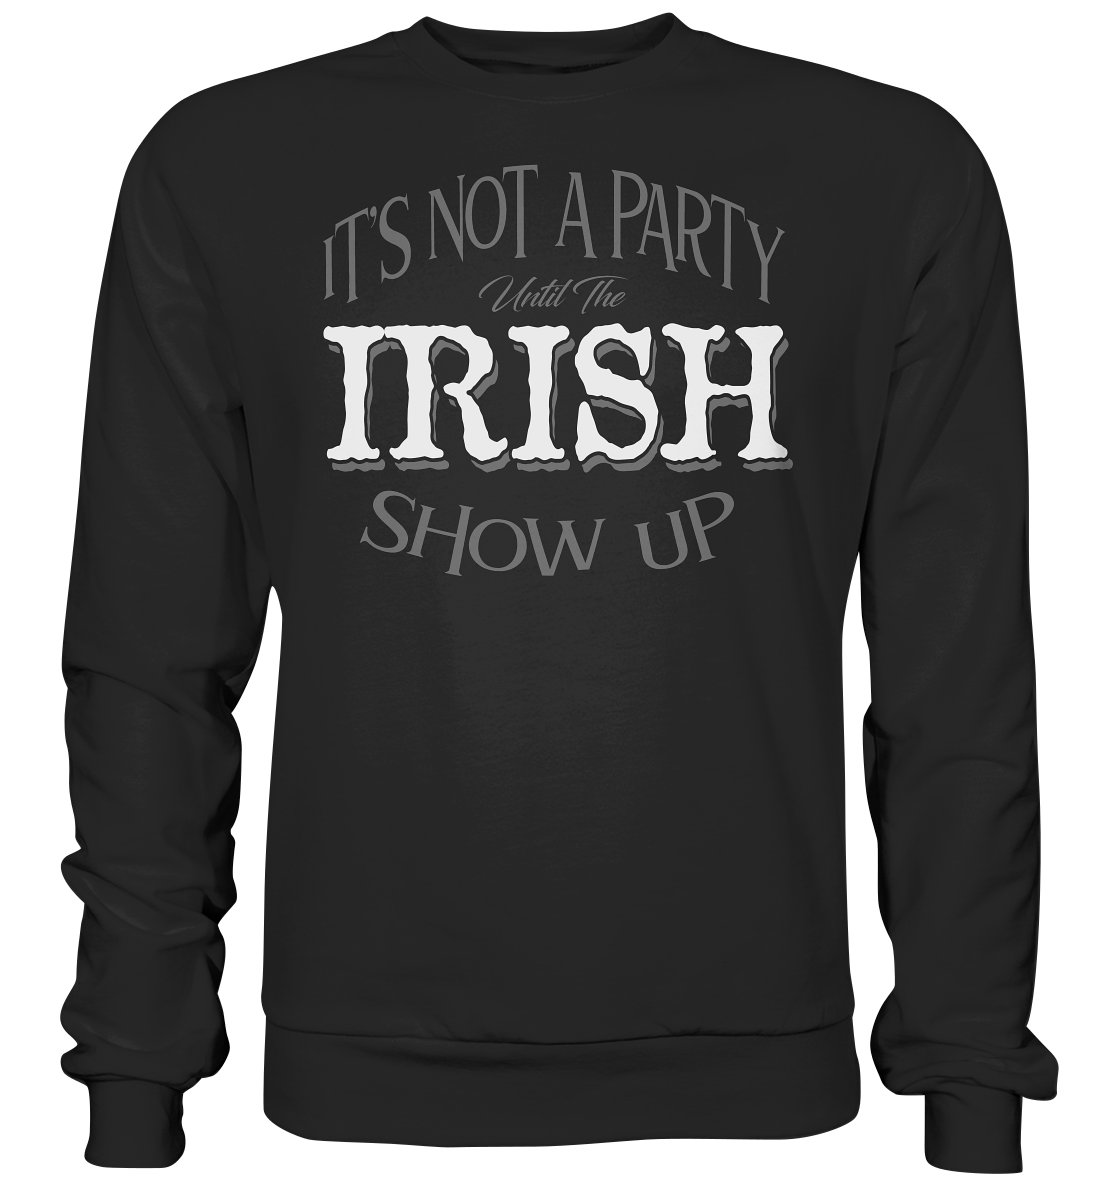 It's Not A Party Until The Irish Show Up - Basic Sweatshirt